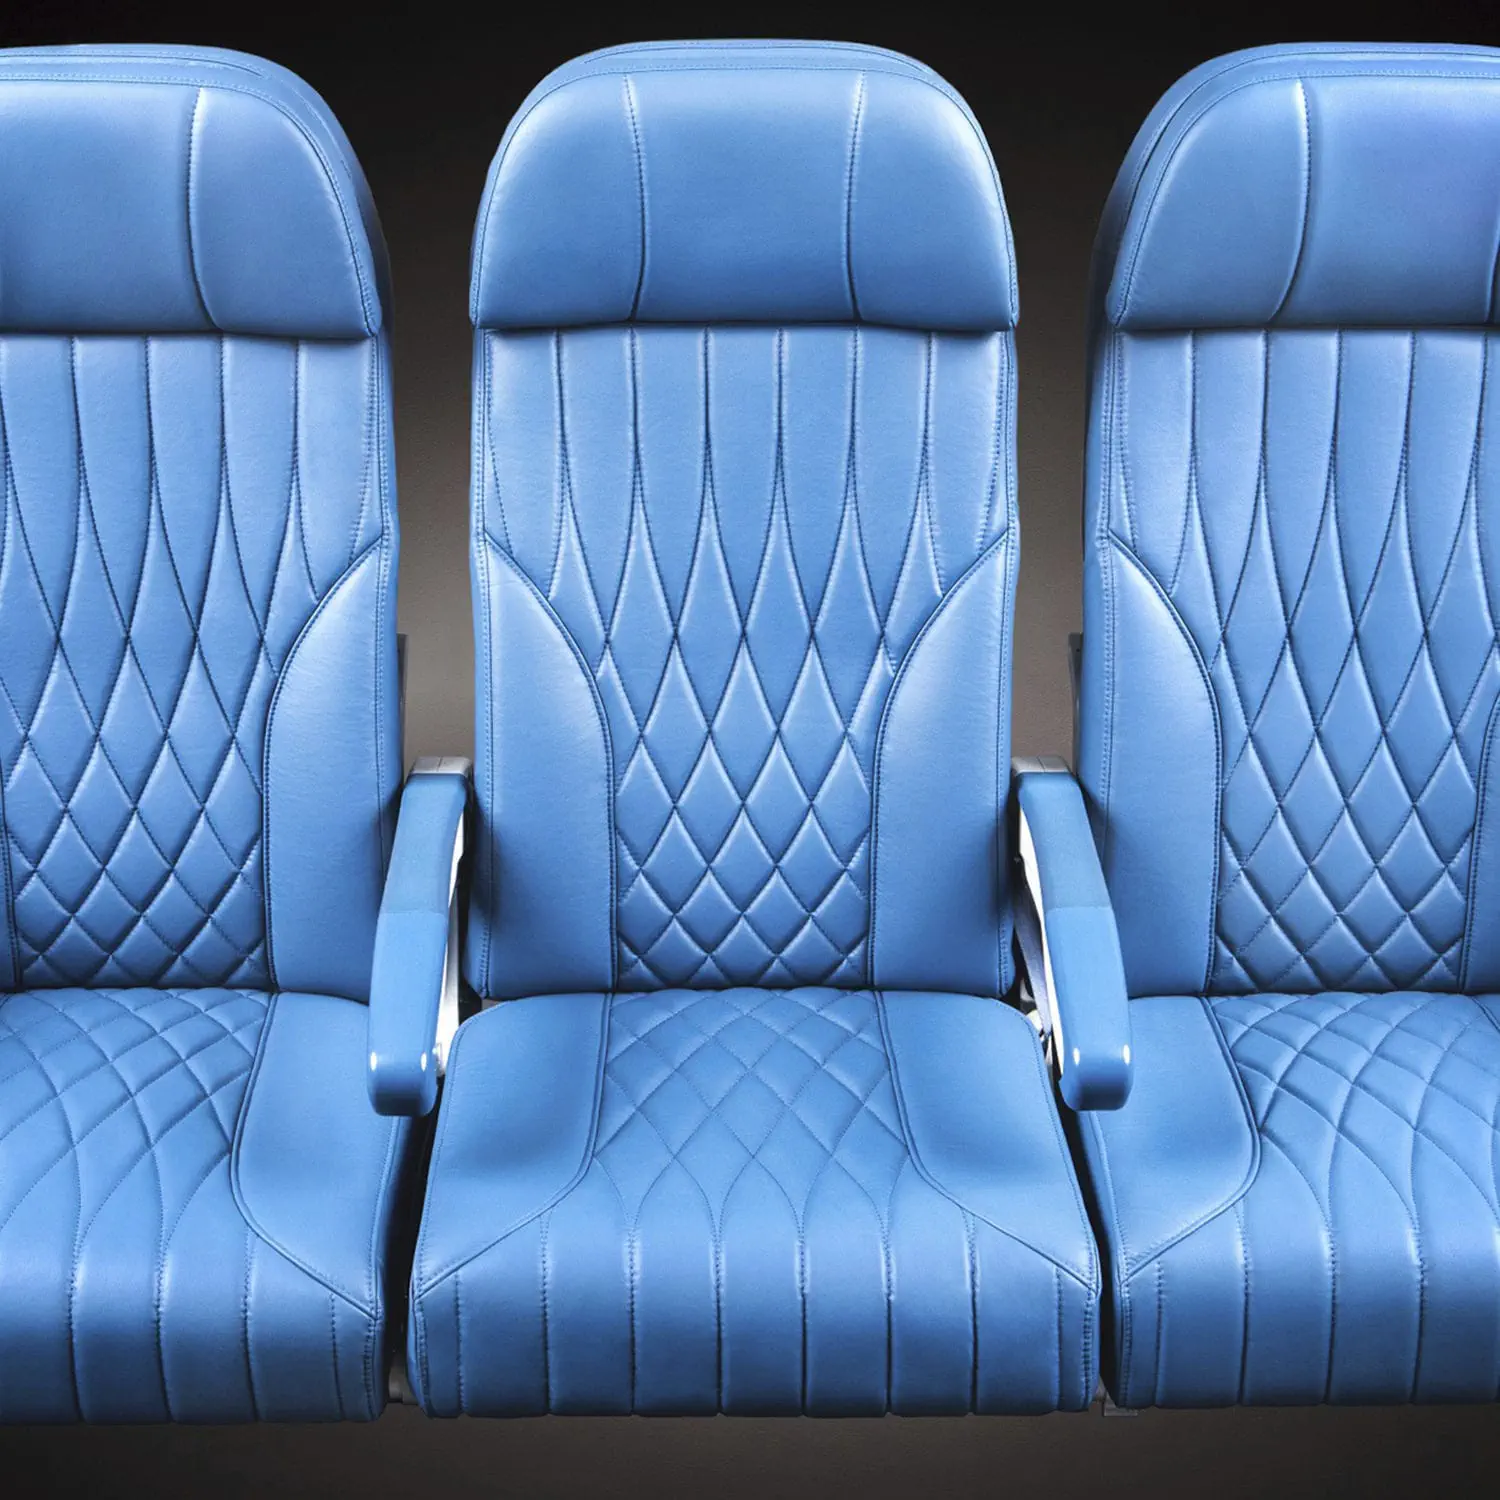 Interior of a private jet showing luxurious leather seats and high-end finishes.